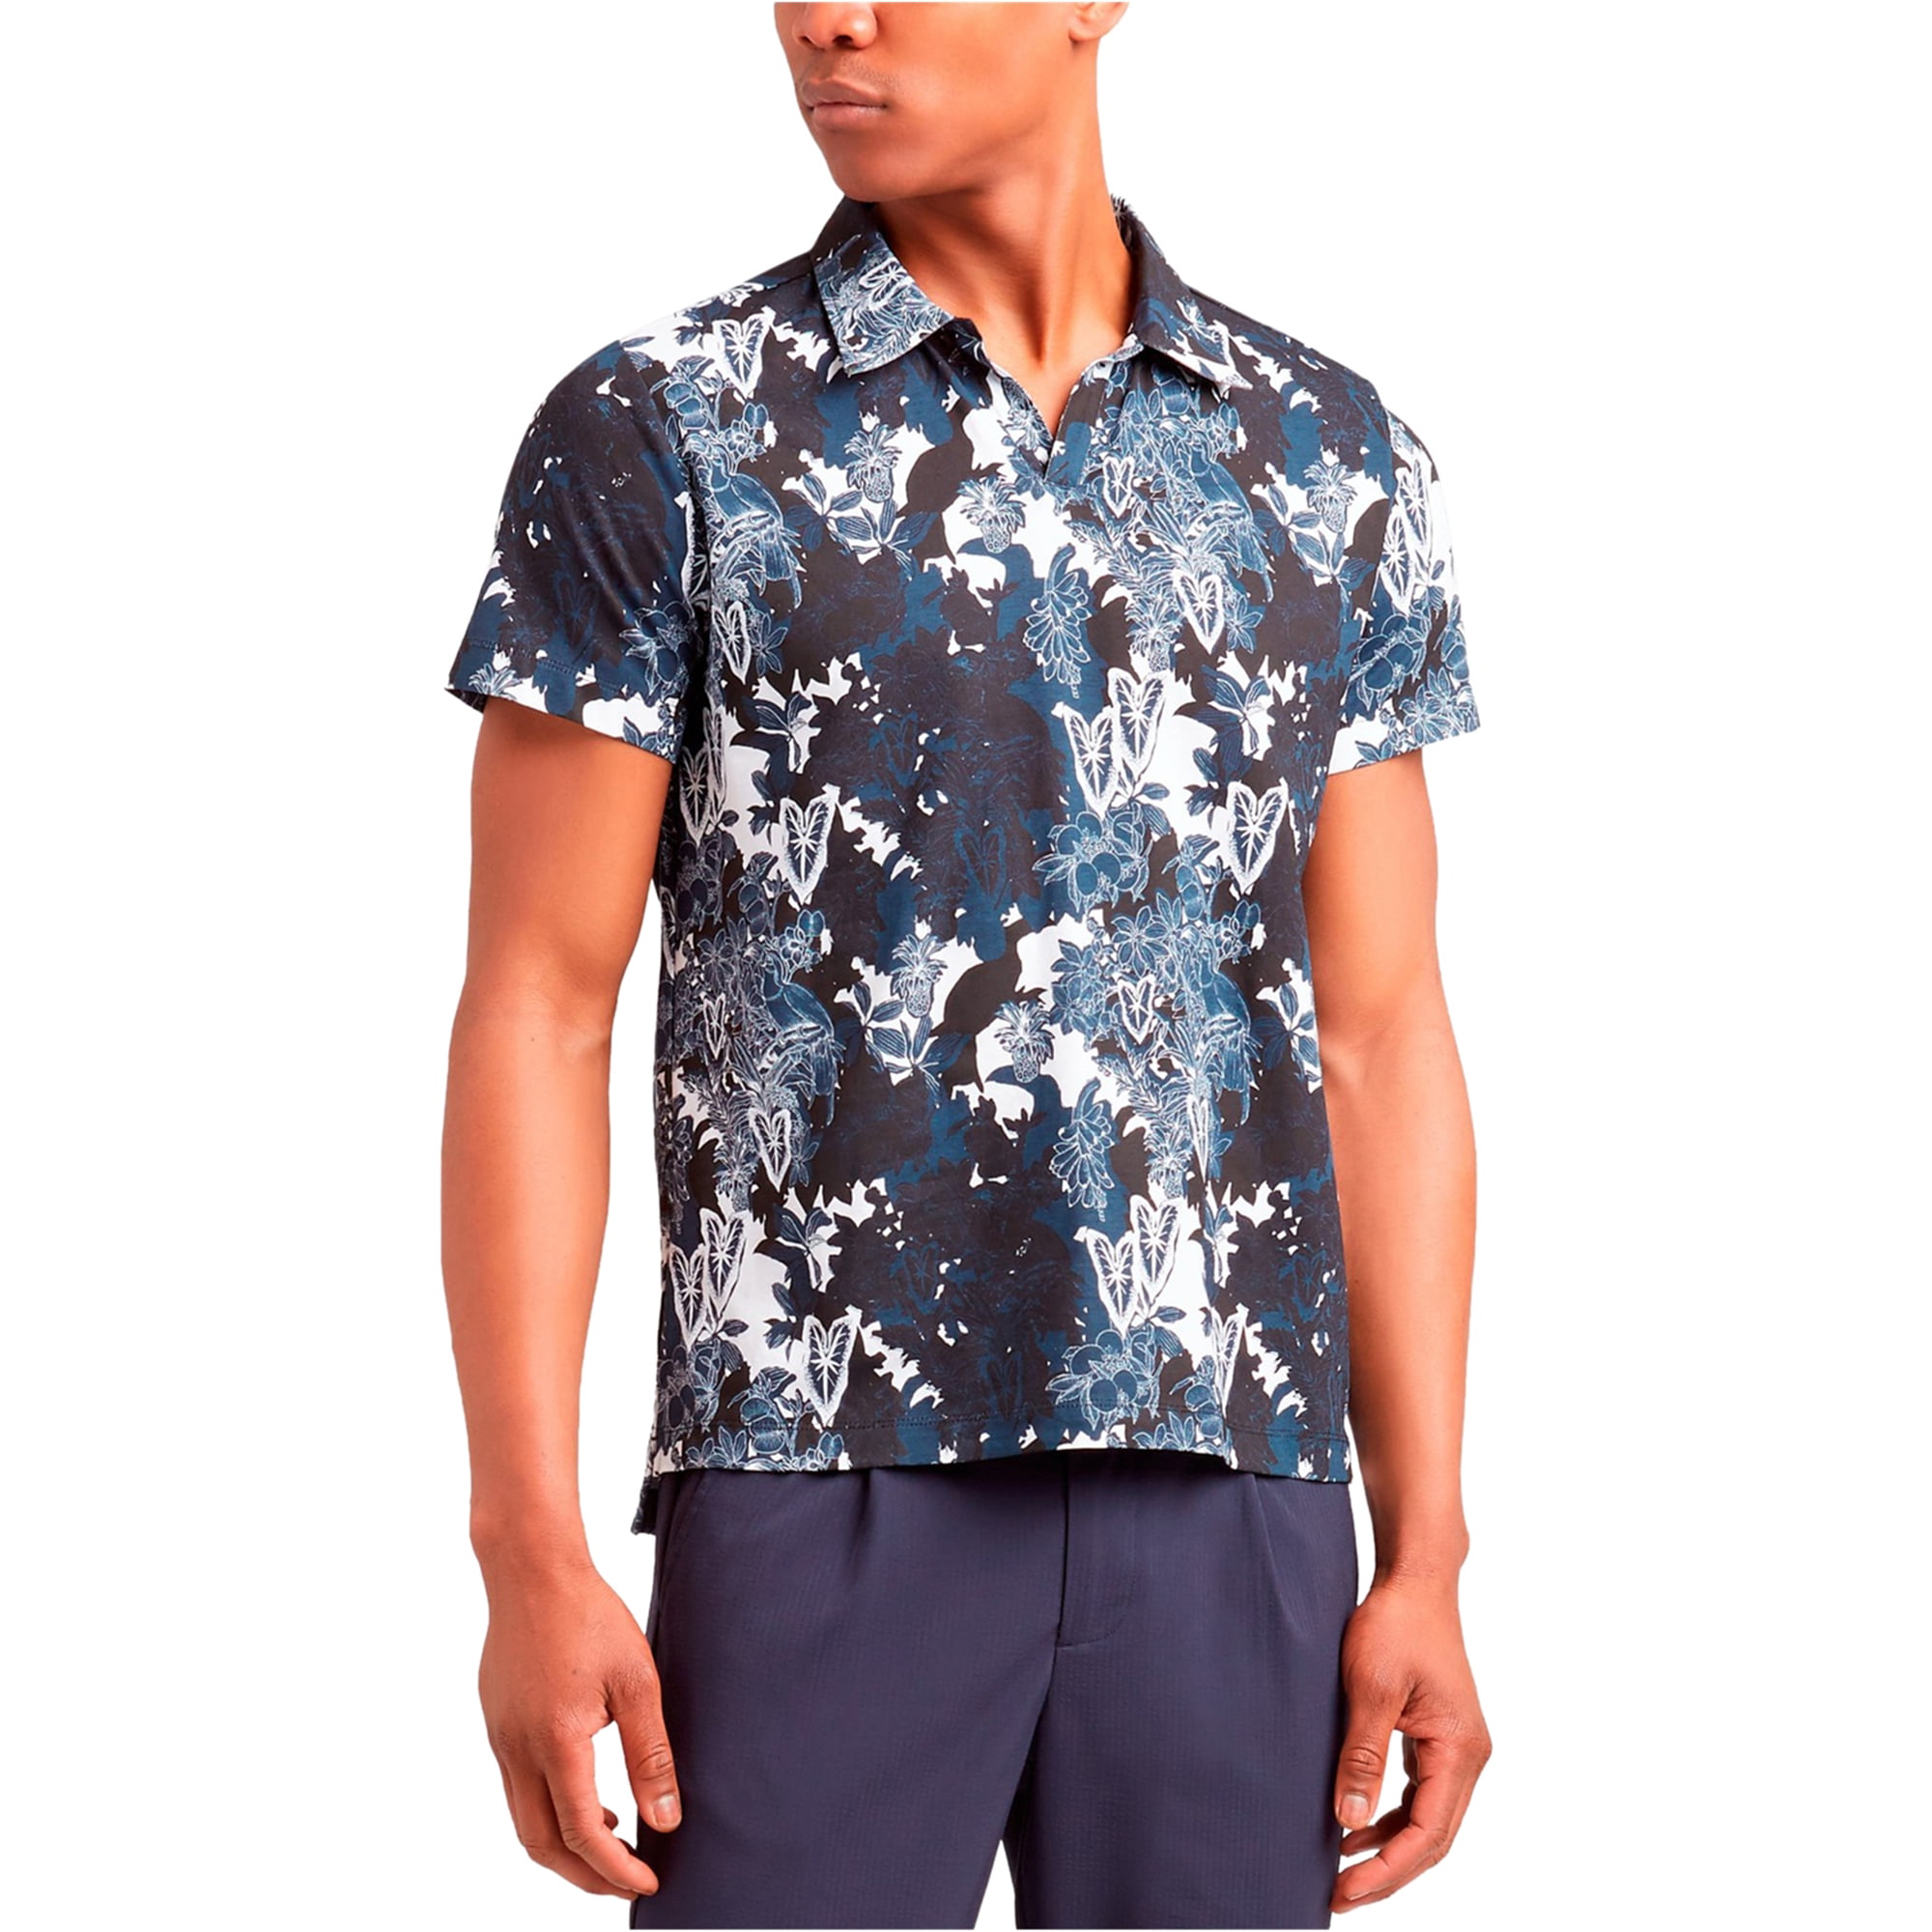 Kenneth Cole - Kenneth Cole Mens Floral Rugby Polo Shirt, blue, Large ...